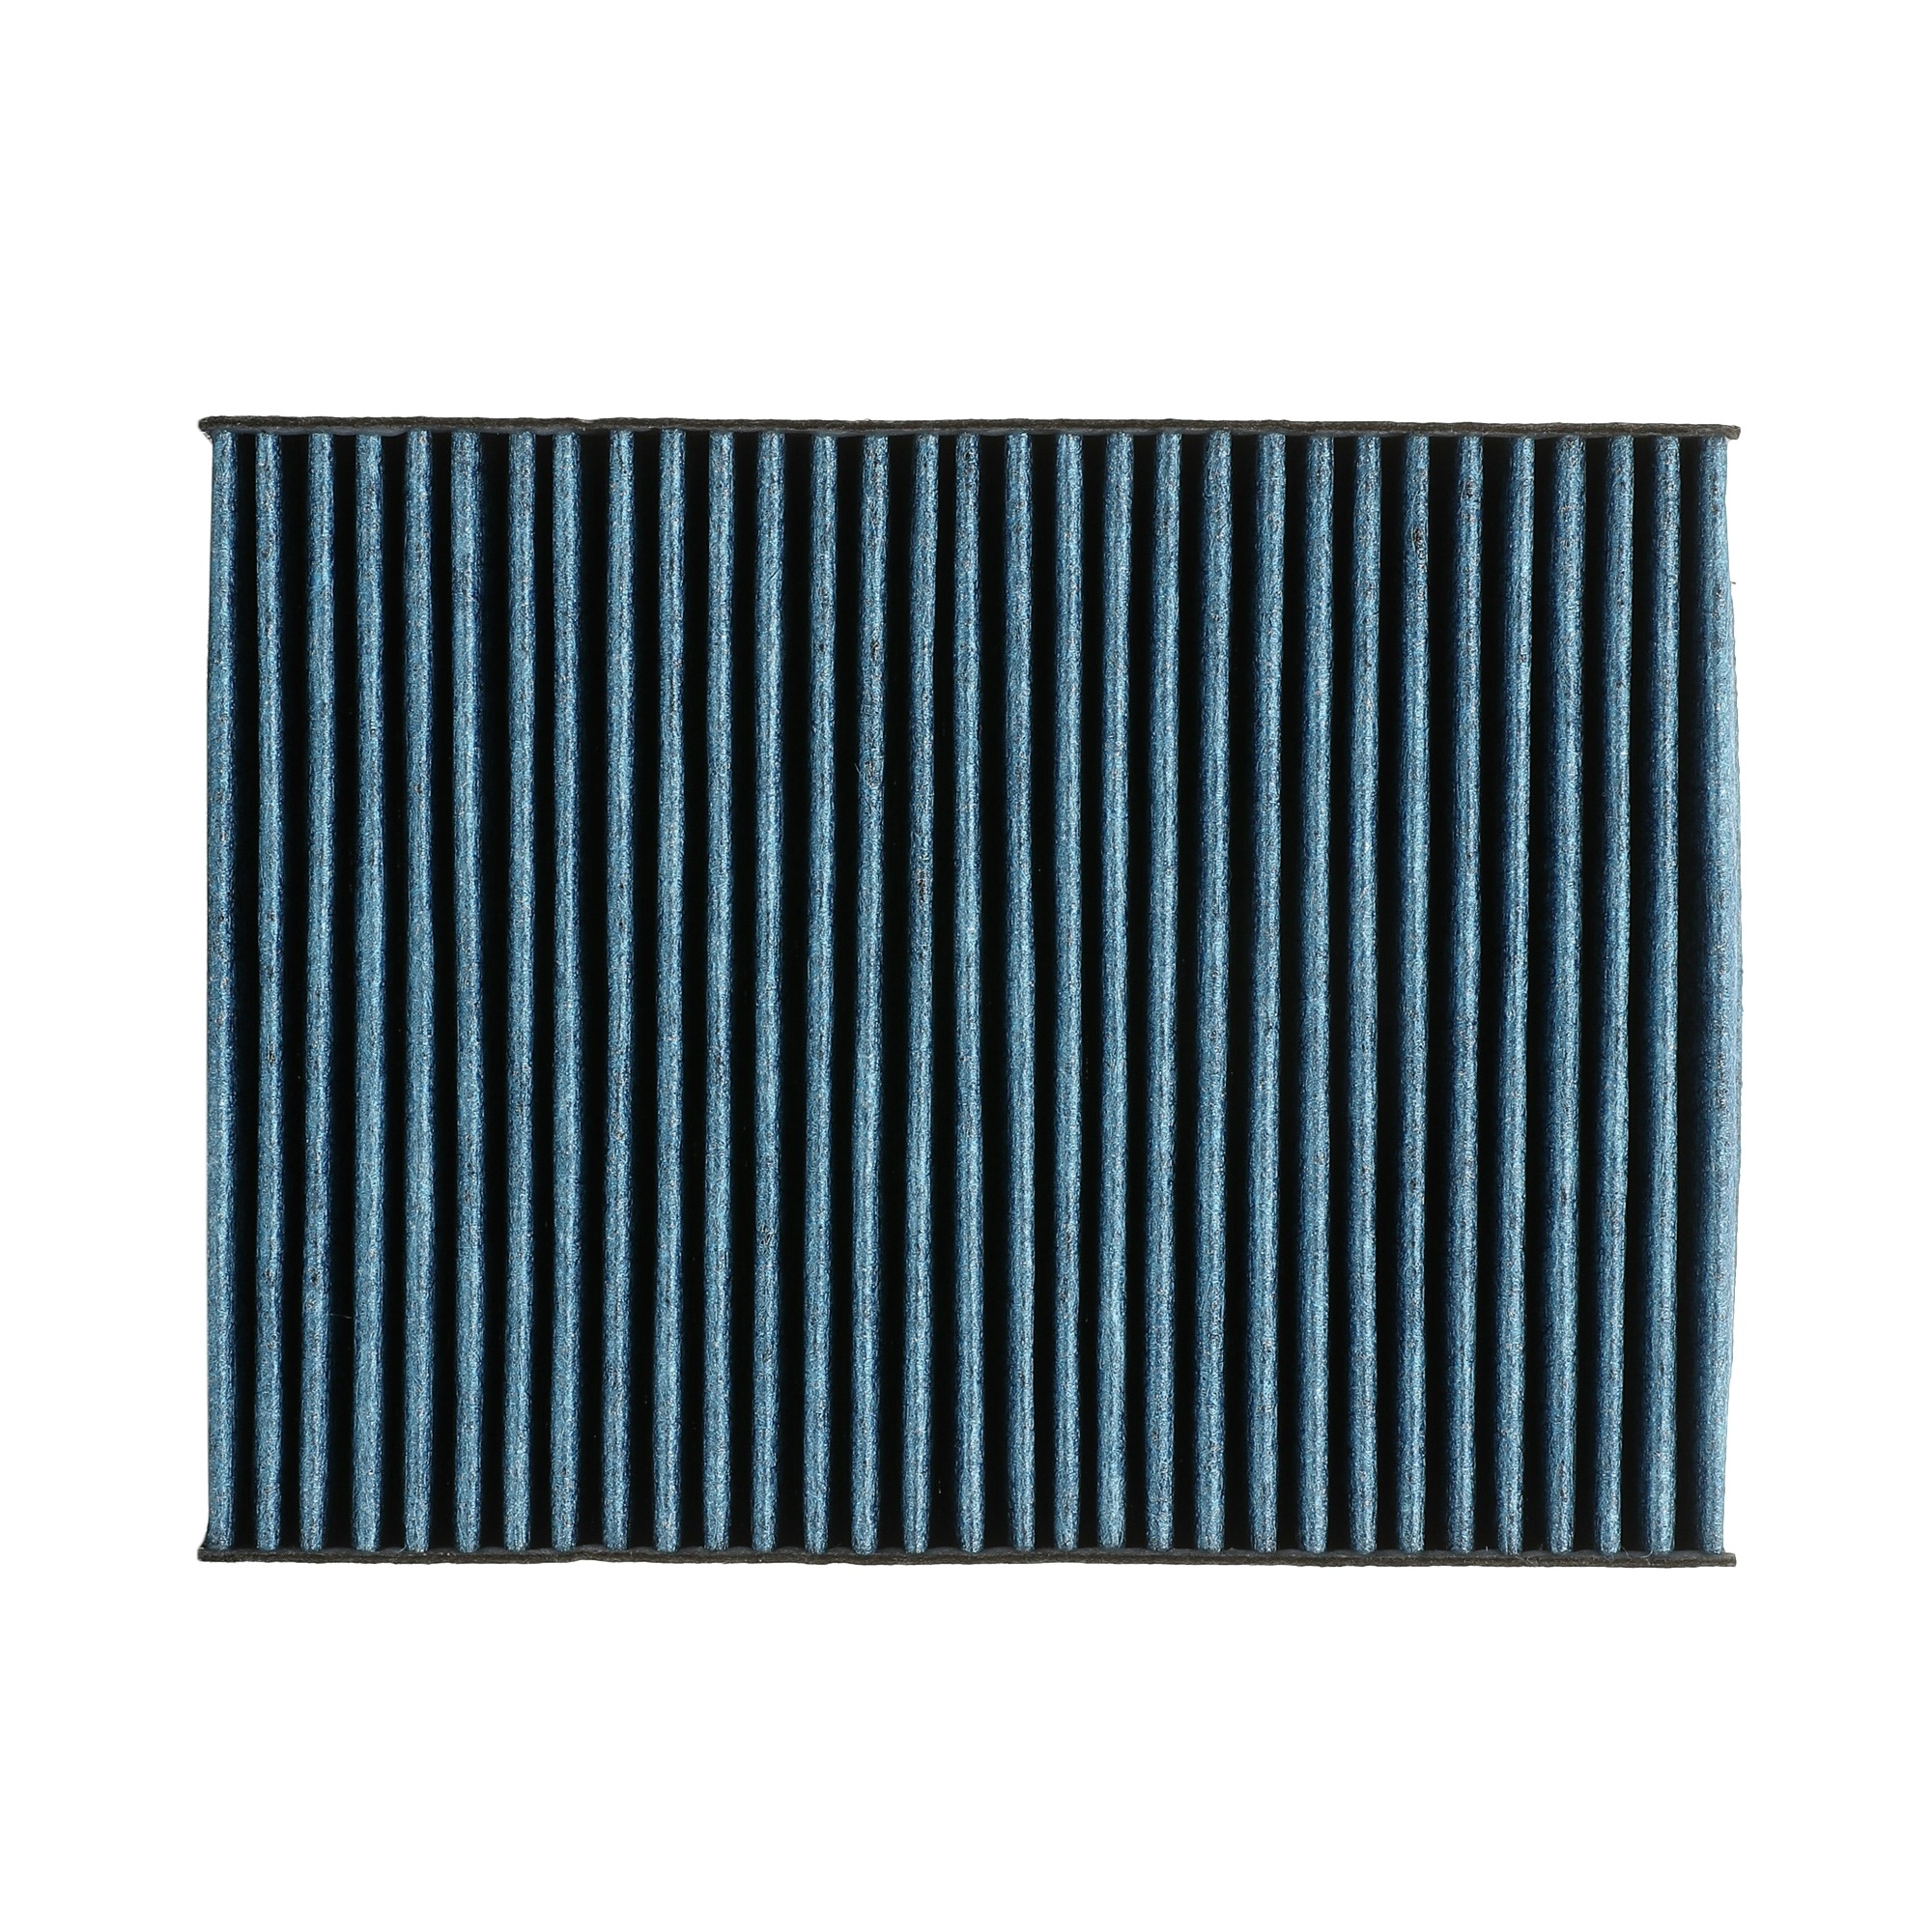 RIDEX PLUS Activated Carbon Filter, with anti-allergic effect, with antibacterial action, 262 mm x 193 mm x 37 mm Width: 193mm, Height: 37mm, Length: 262mm Cabin filter 424I0522P buy